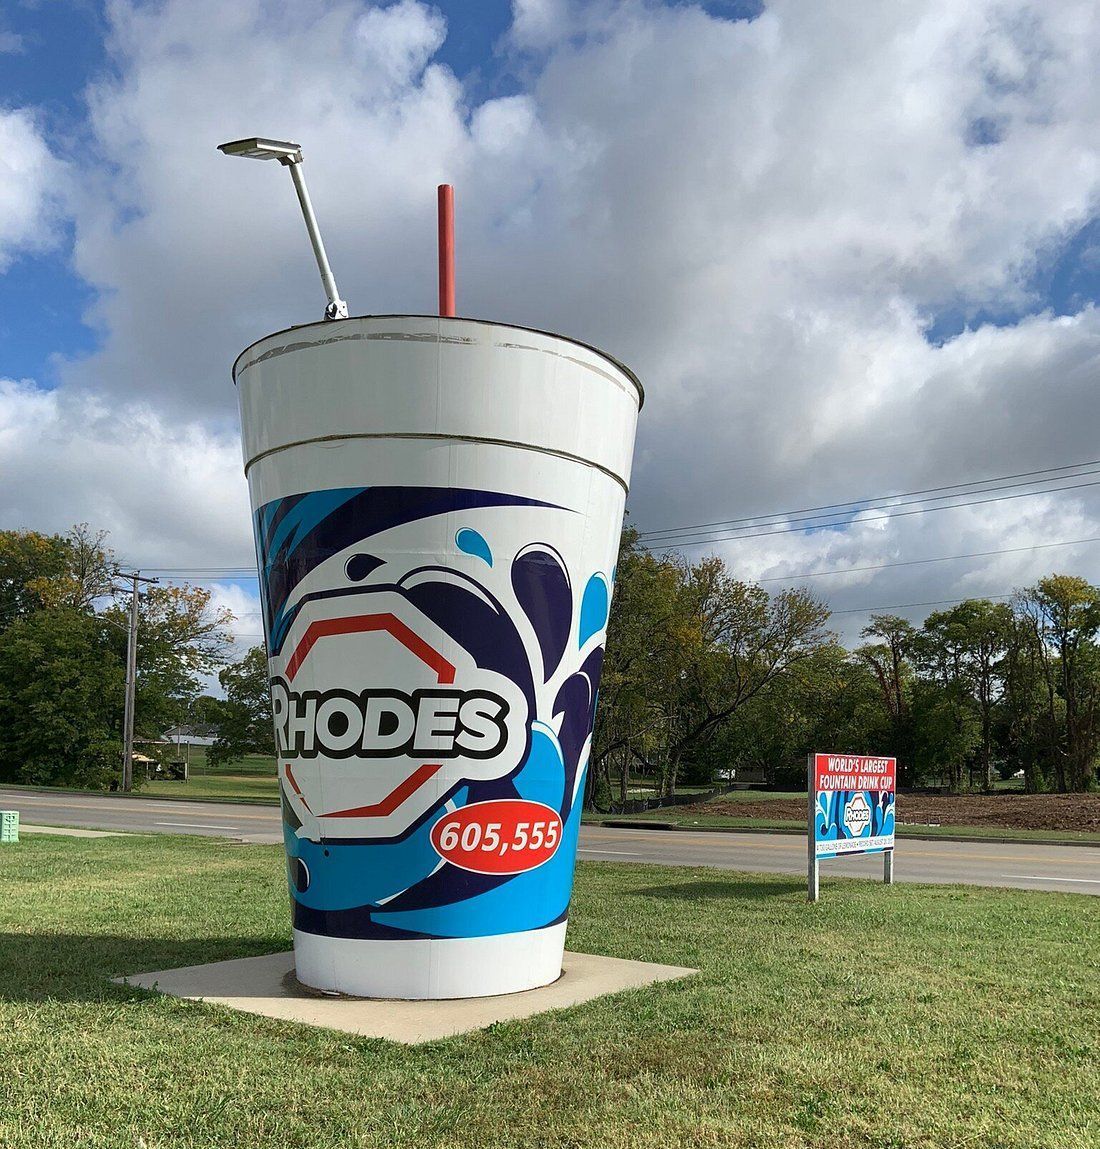 World's Largest Cup of Soft Drink: world record in Cape Giradeau, Missouri